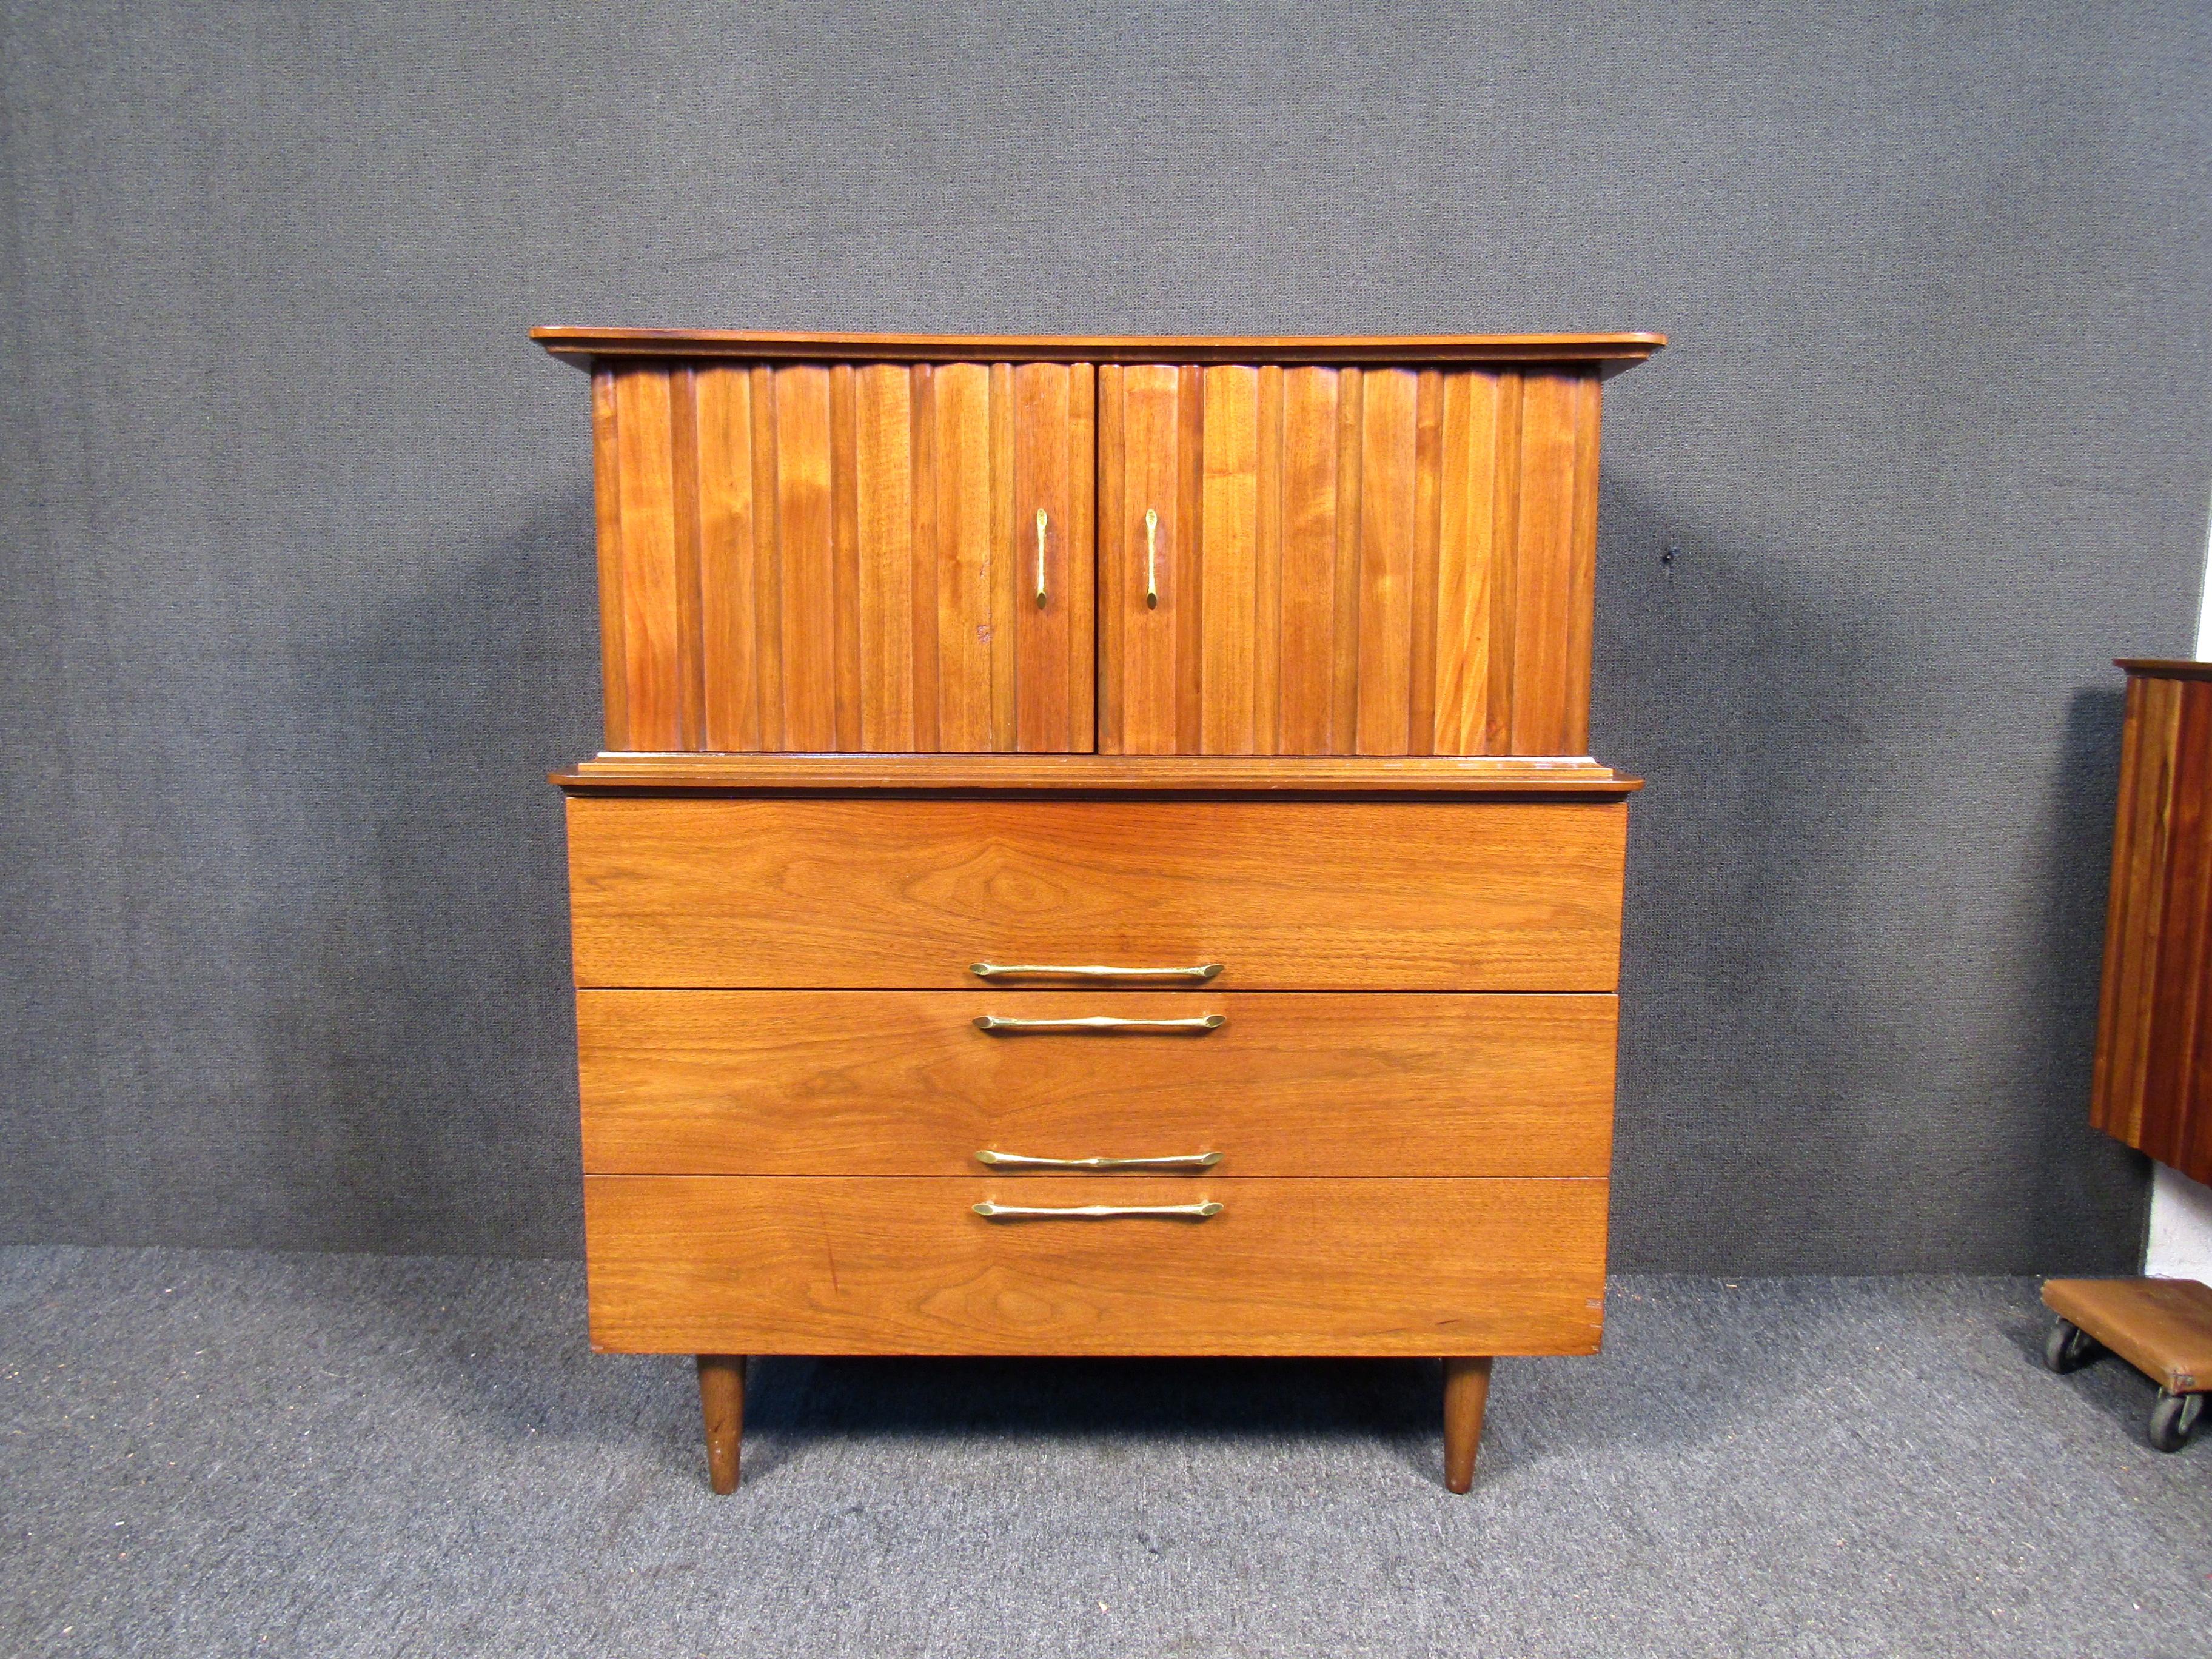 A Mid-Century Modern hi-boy dresser featuring two doors, seven drawers and a sleek walnut construction. This piece has unusual brass handles with walnut feet. The dresser will surely be a great addition to any living space.
Please confirm item